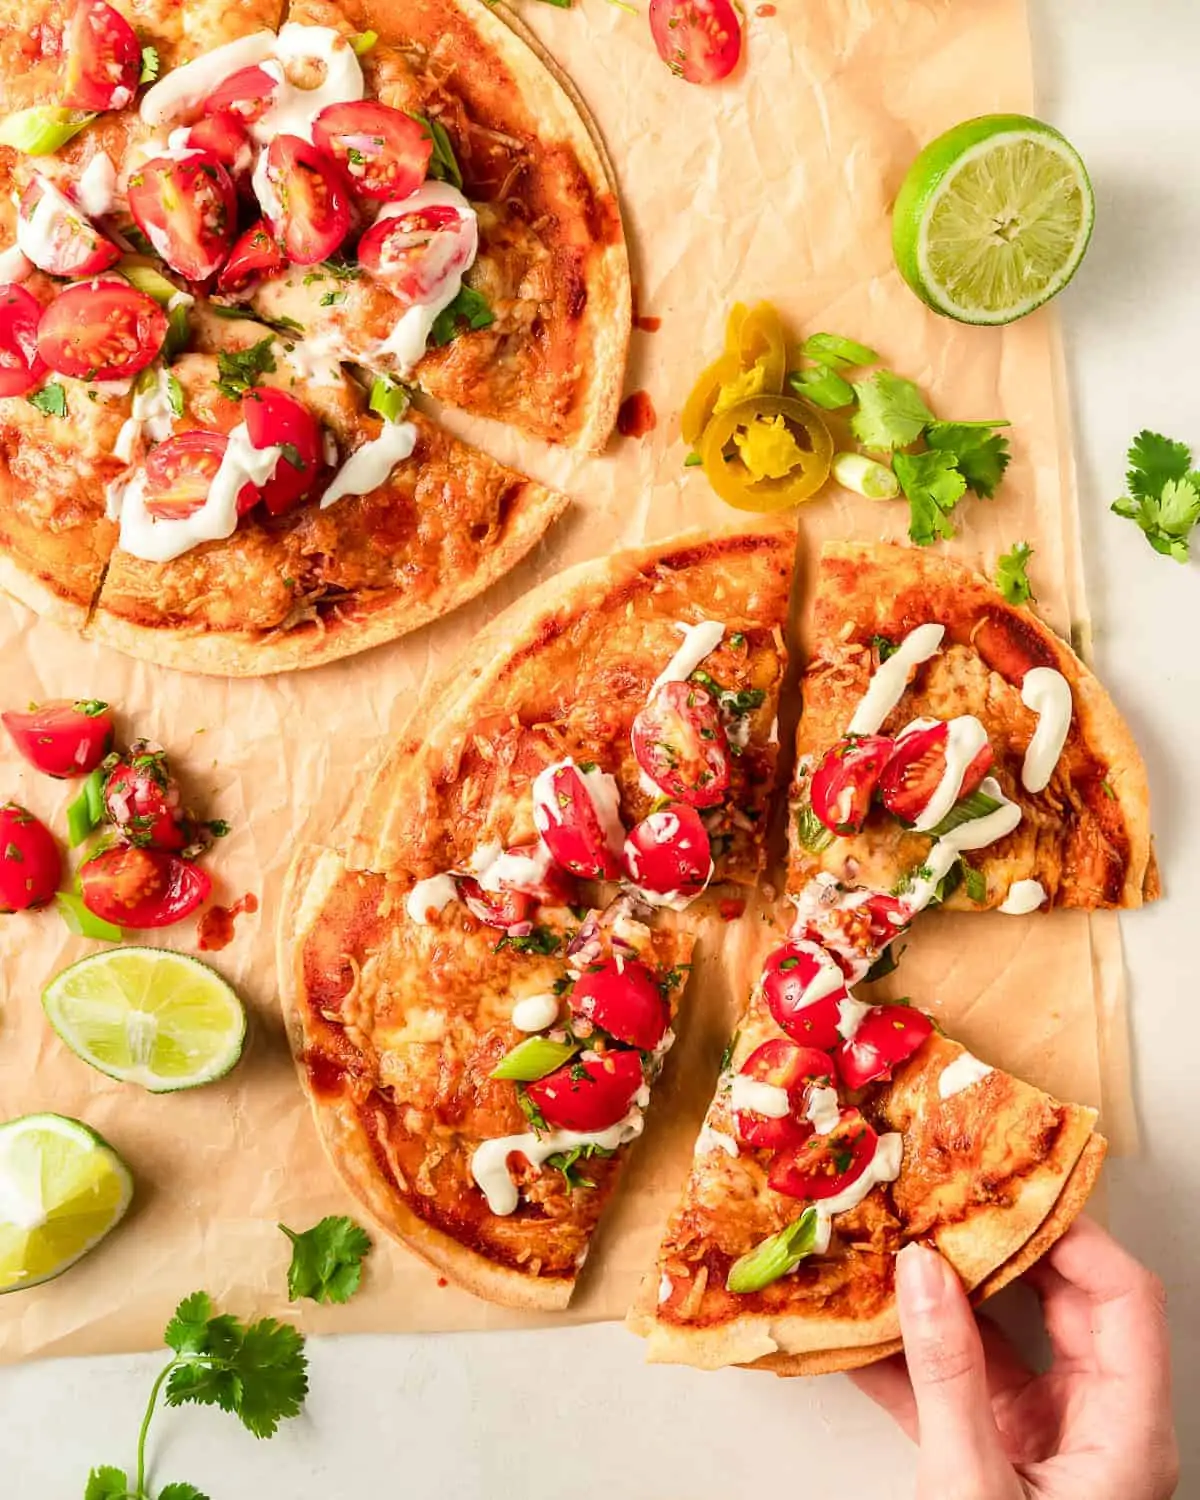 A slice of Mexican pizza